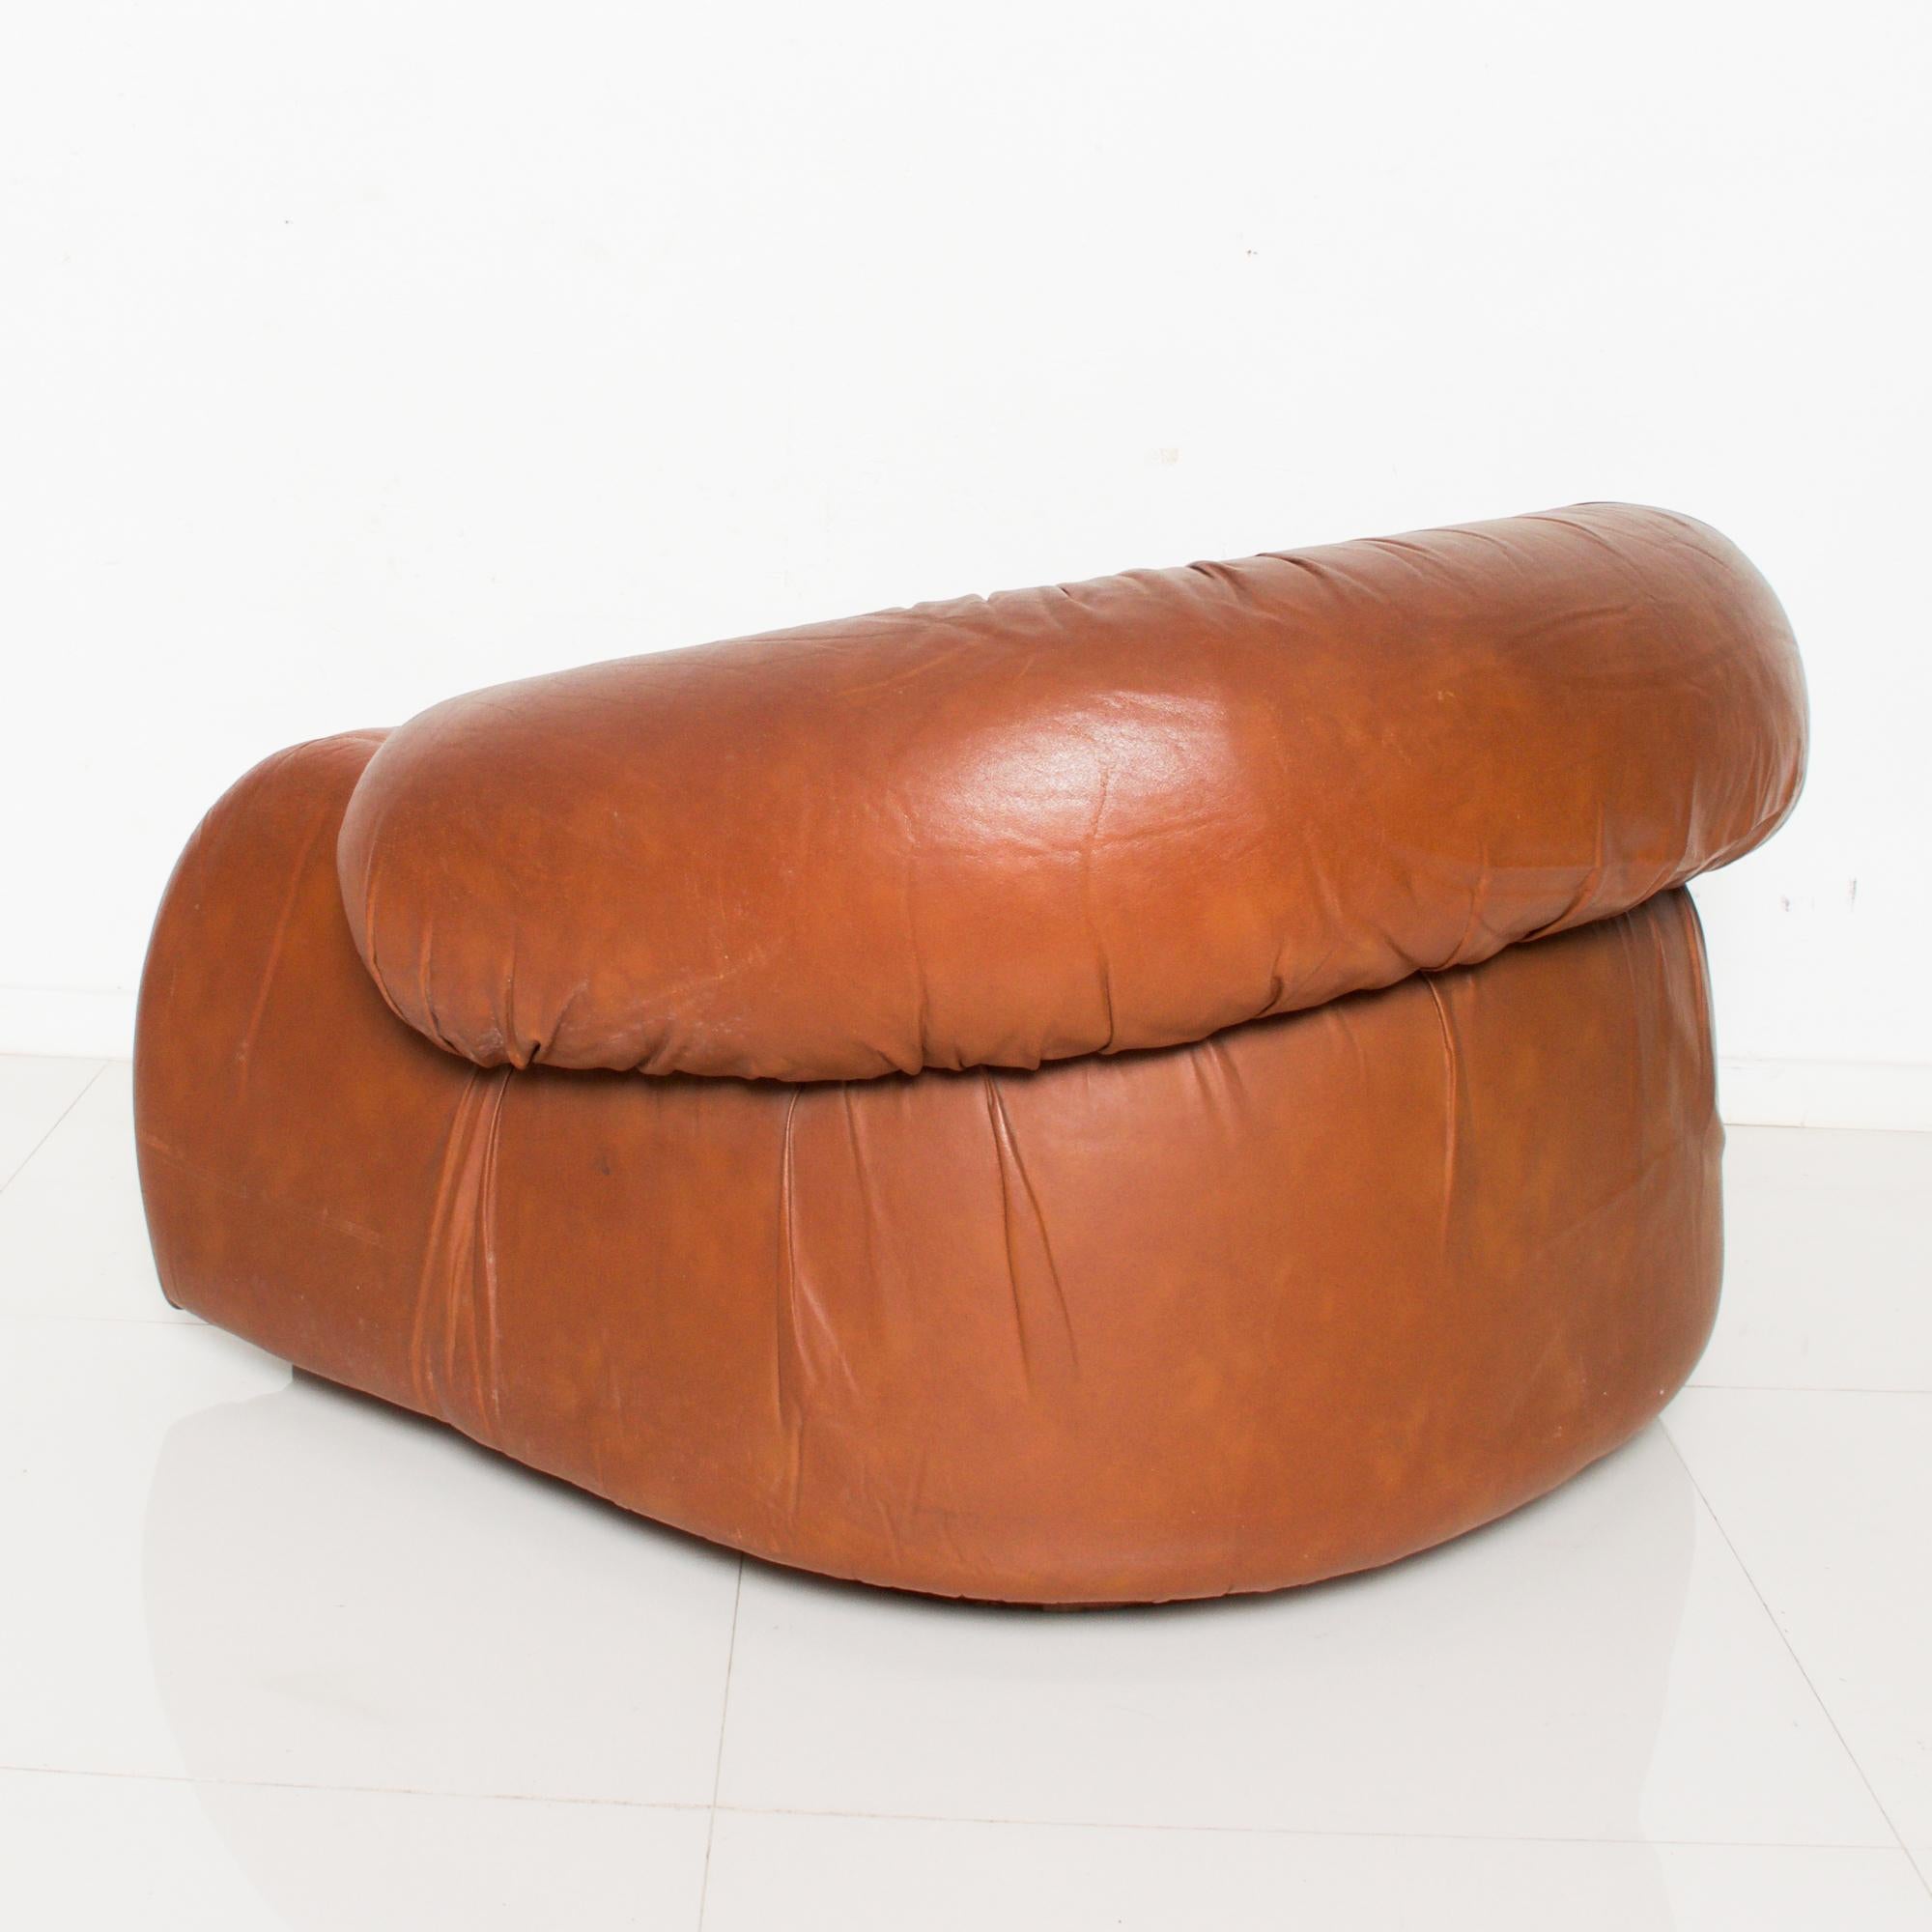 Mid-20th Century Poltrona Pair of Cognac Leather Lounge Chairs by Giuseppe Munari 1960s Italy